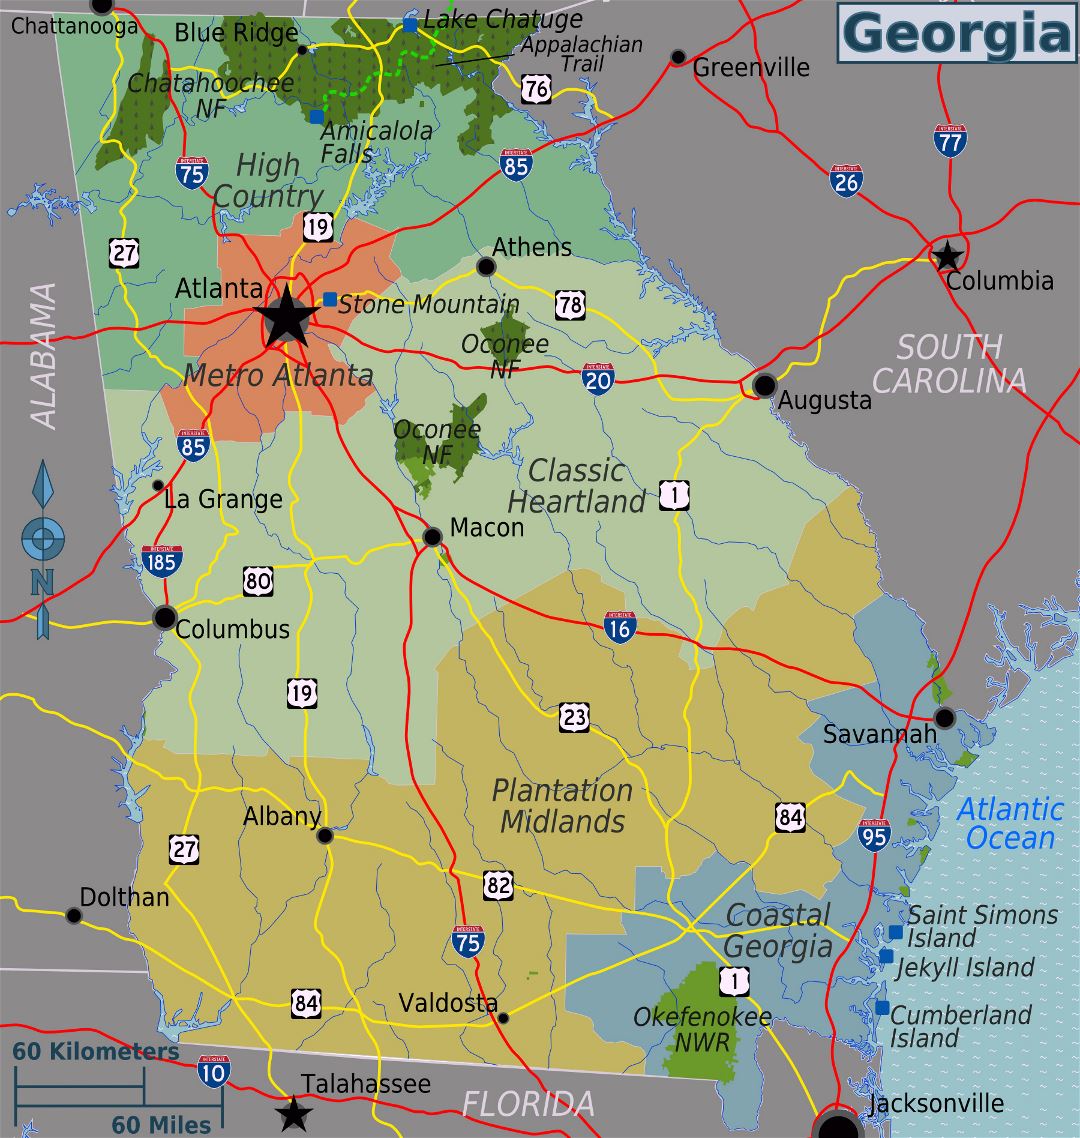 Large regions map of Georgia state